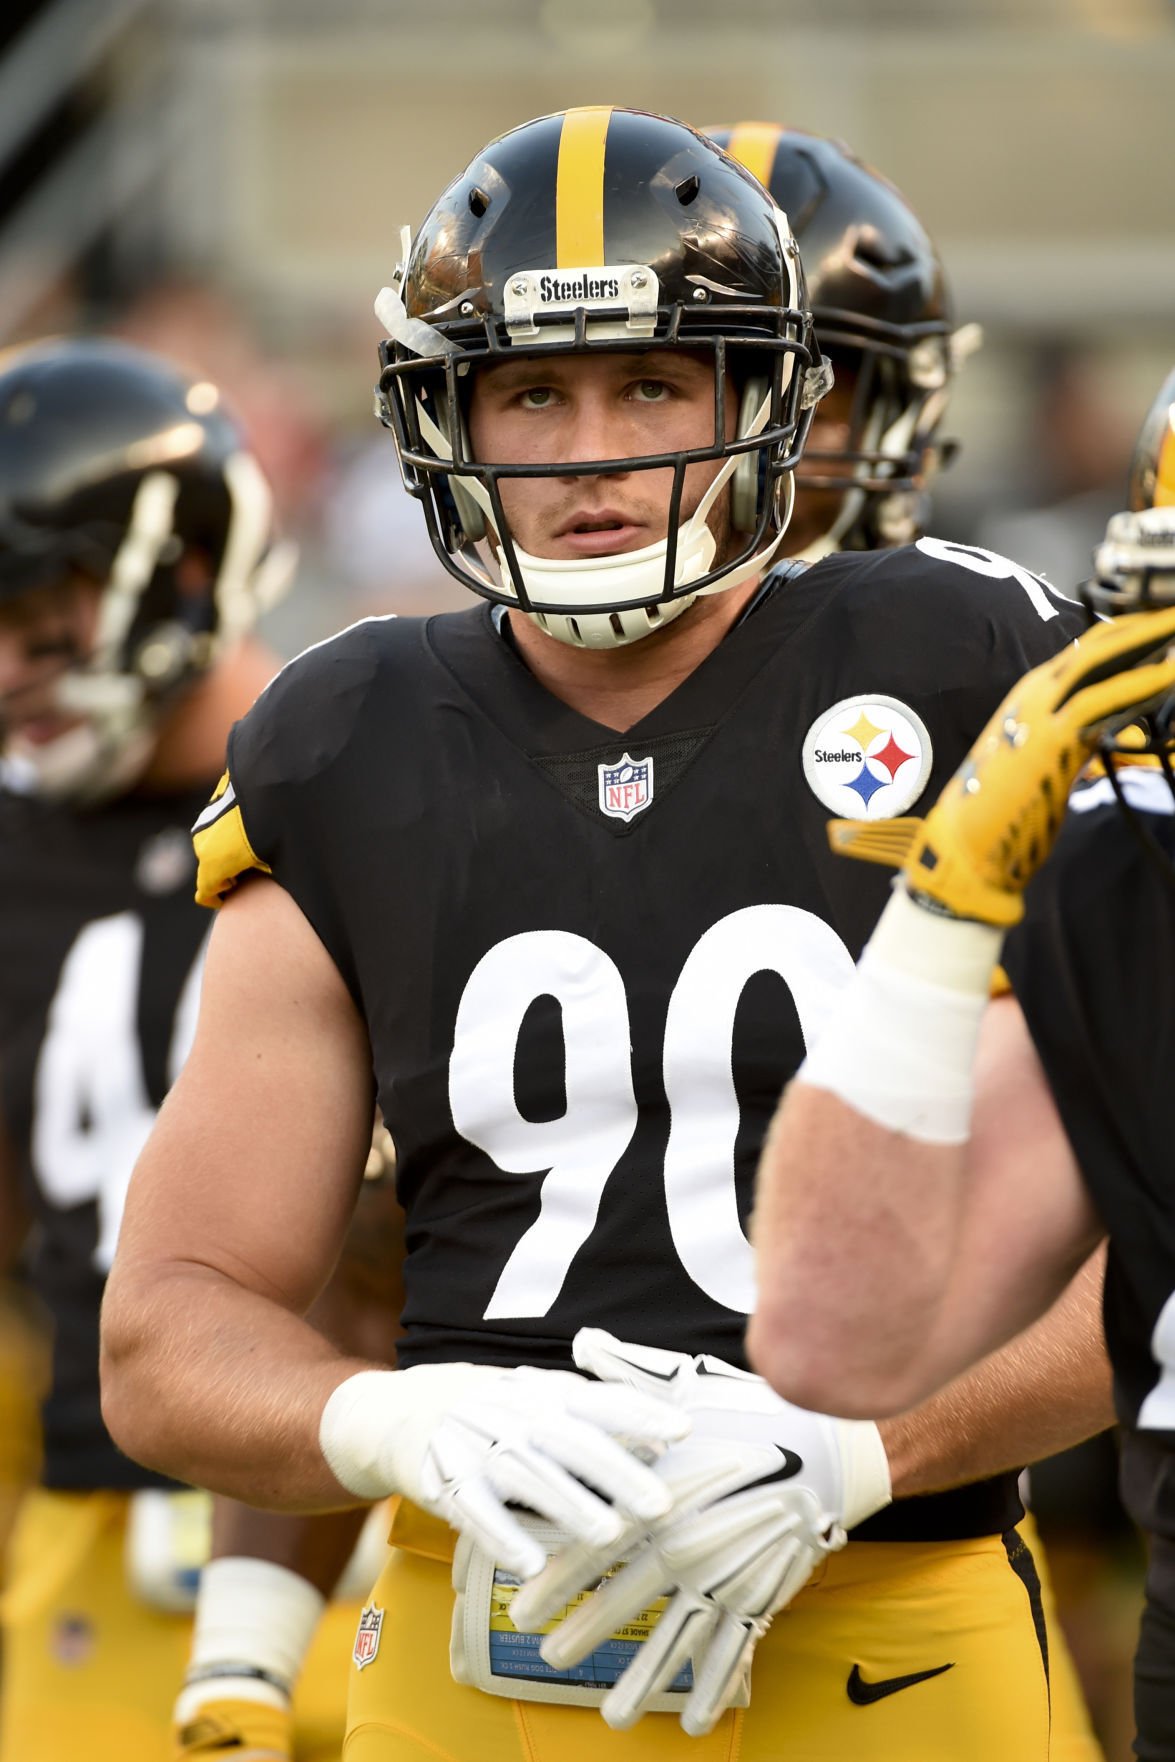 NFL: Former Badger T.J. Watt jumps into starting gig with Steelers | Pro football ...1175 x 1762